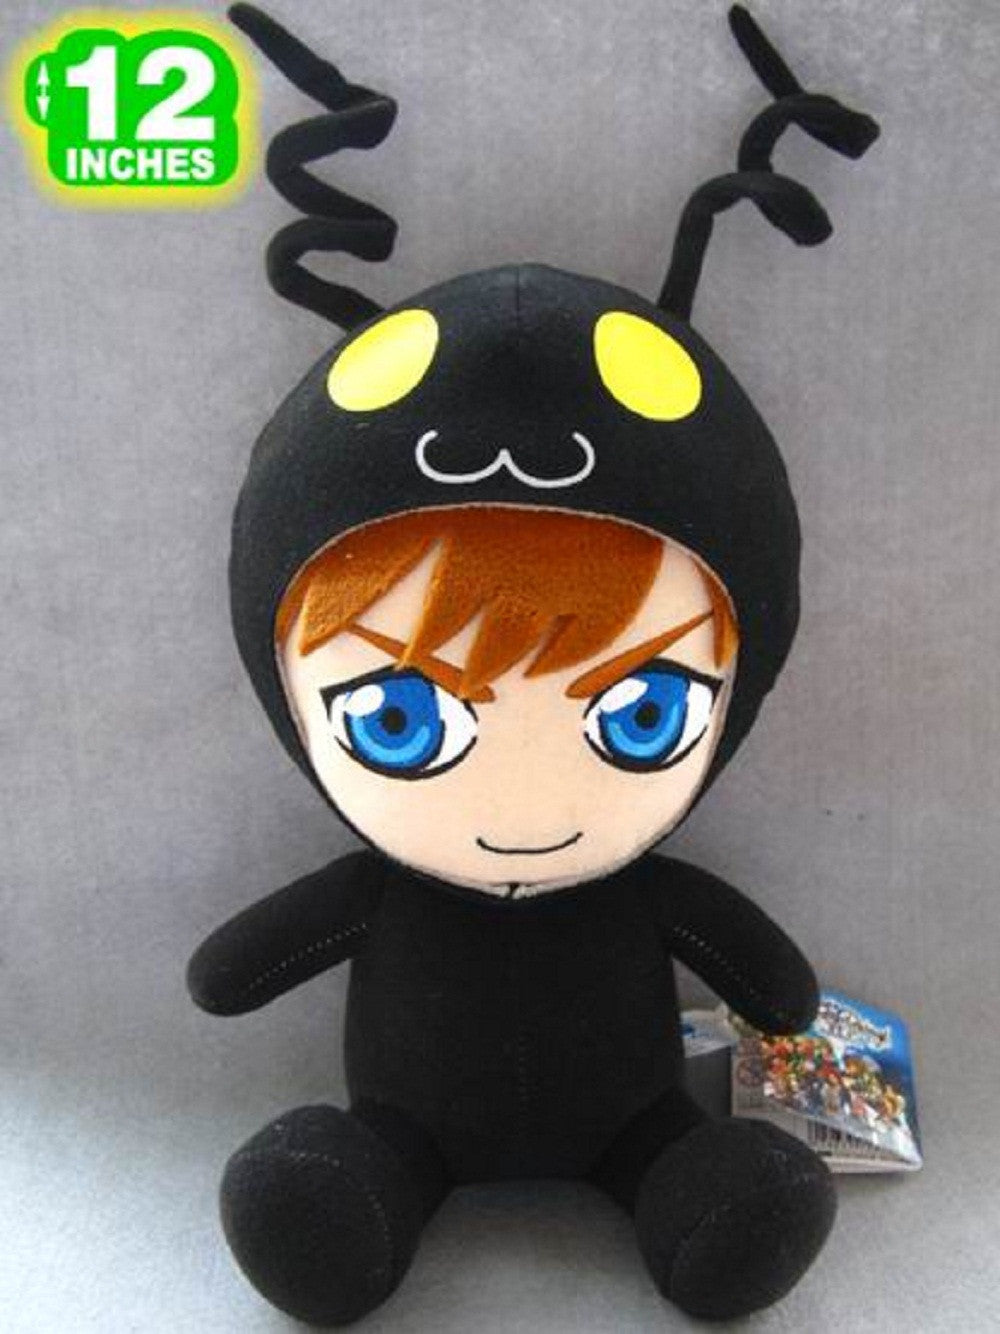 Kingdom Hearts Sora in Cosplay Plush Doll - Super Anime Store FREE SHIPPING FAST SHIPPING USA